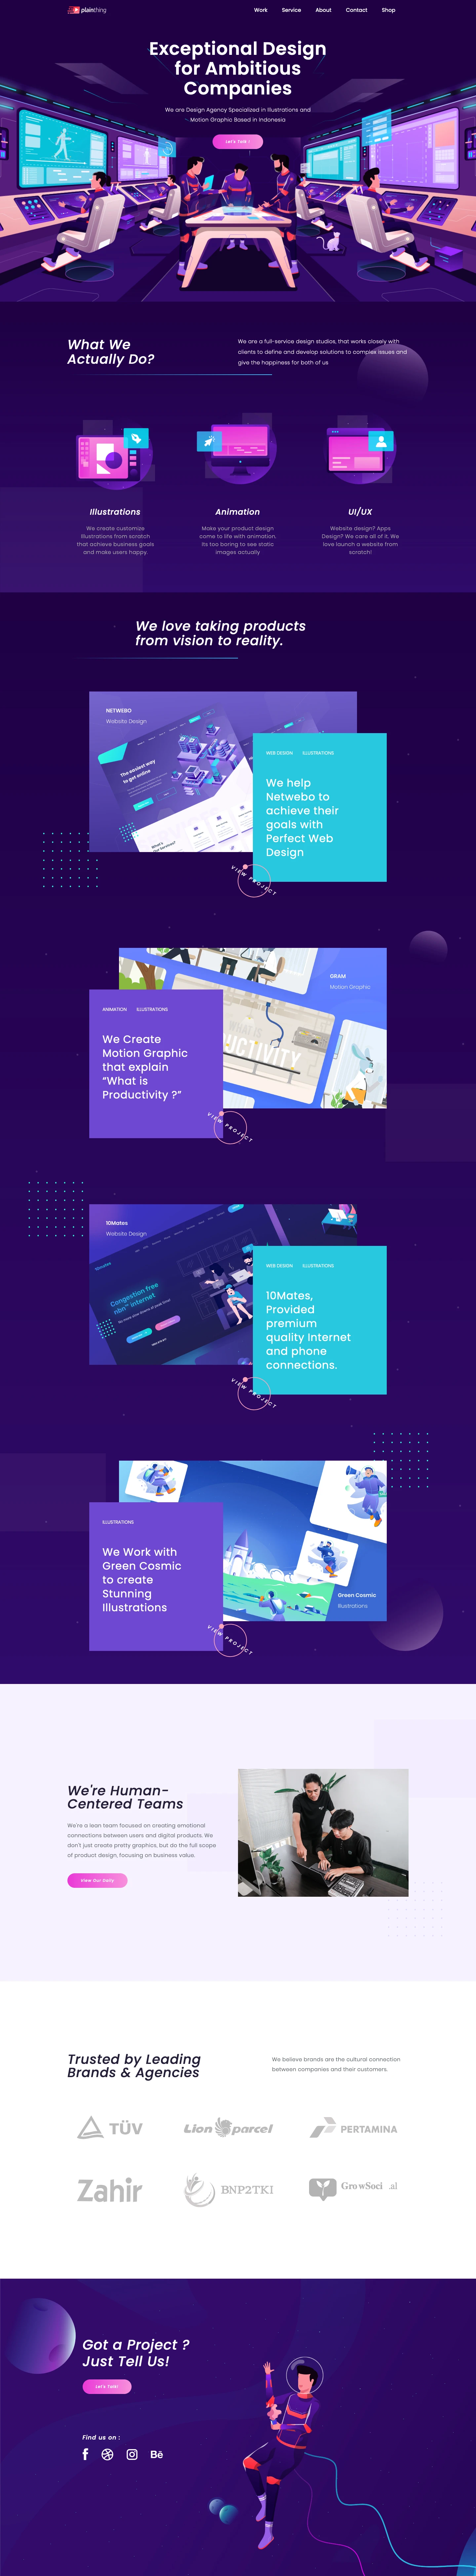 Plainthing Studio Landing Page Example: We are Design Agency Specialized in Illustrations and Motion Graphic Based in Yogyakarta, Indonesia.